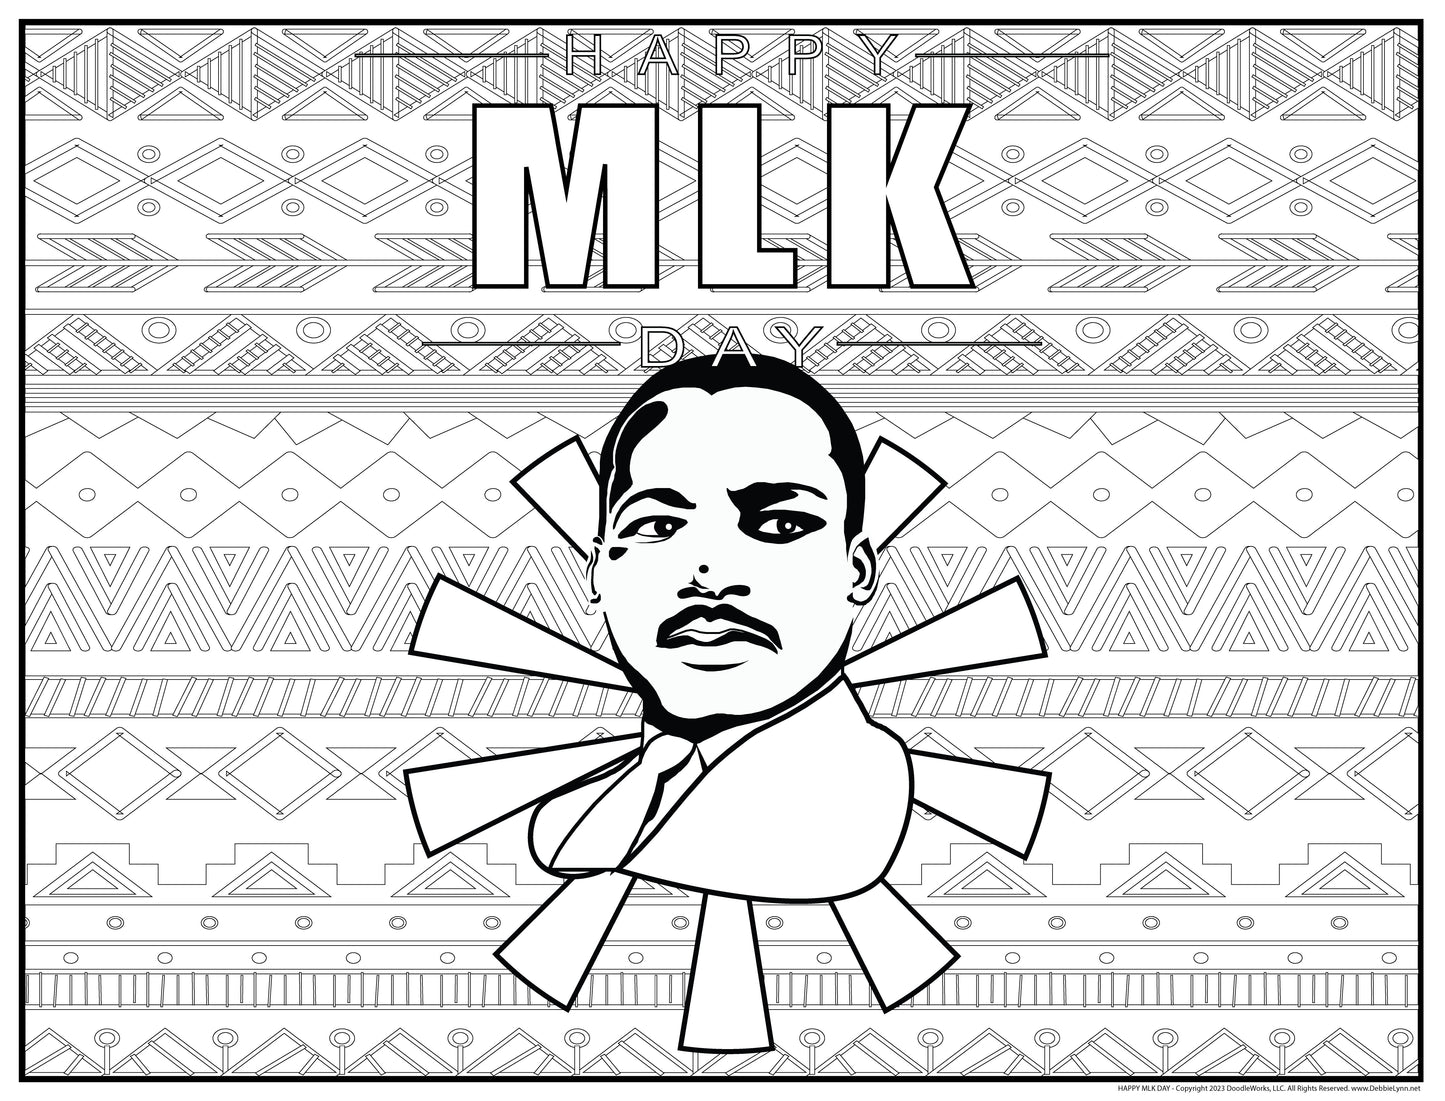 Happy MLK Day Personalized Giant Coloring Poster 46"x60"